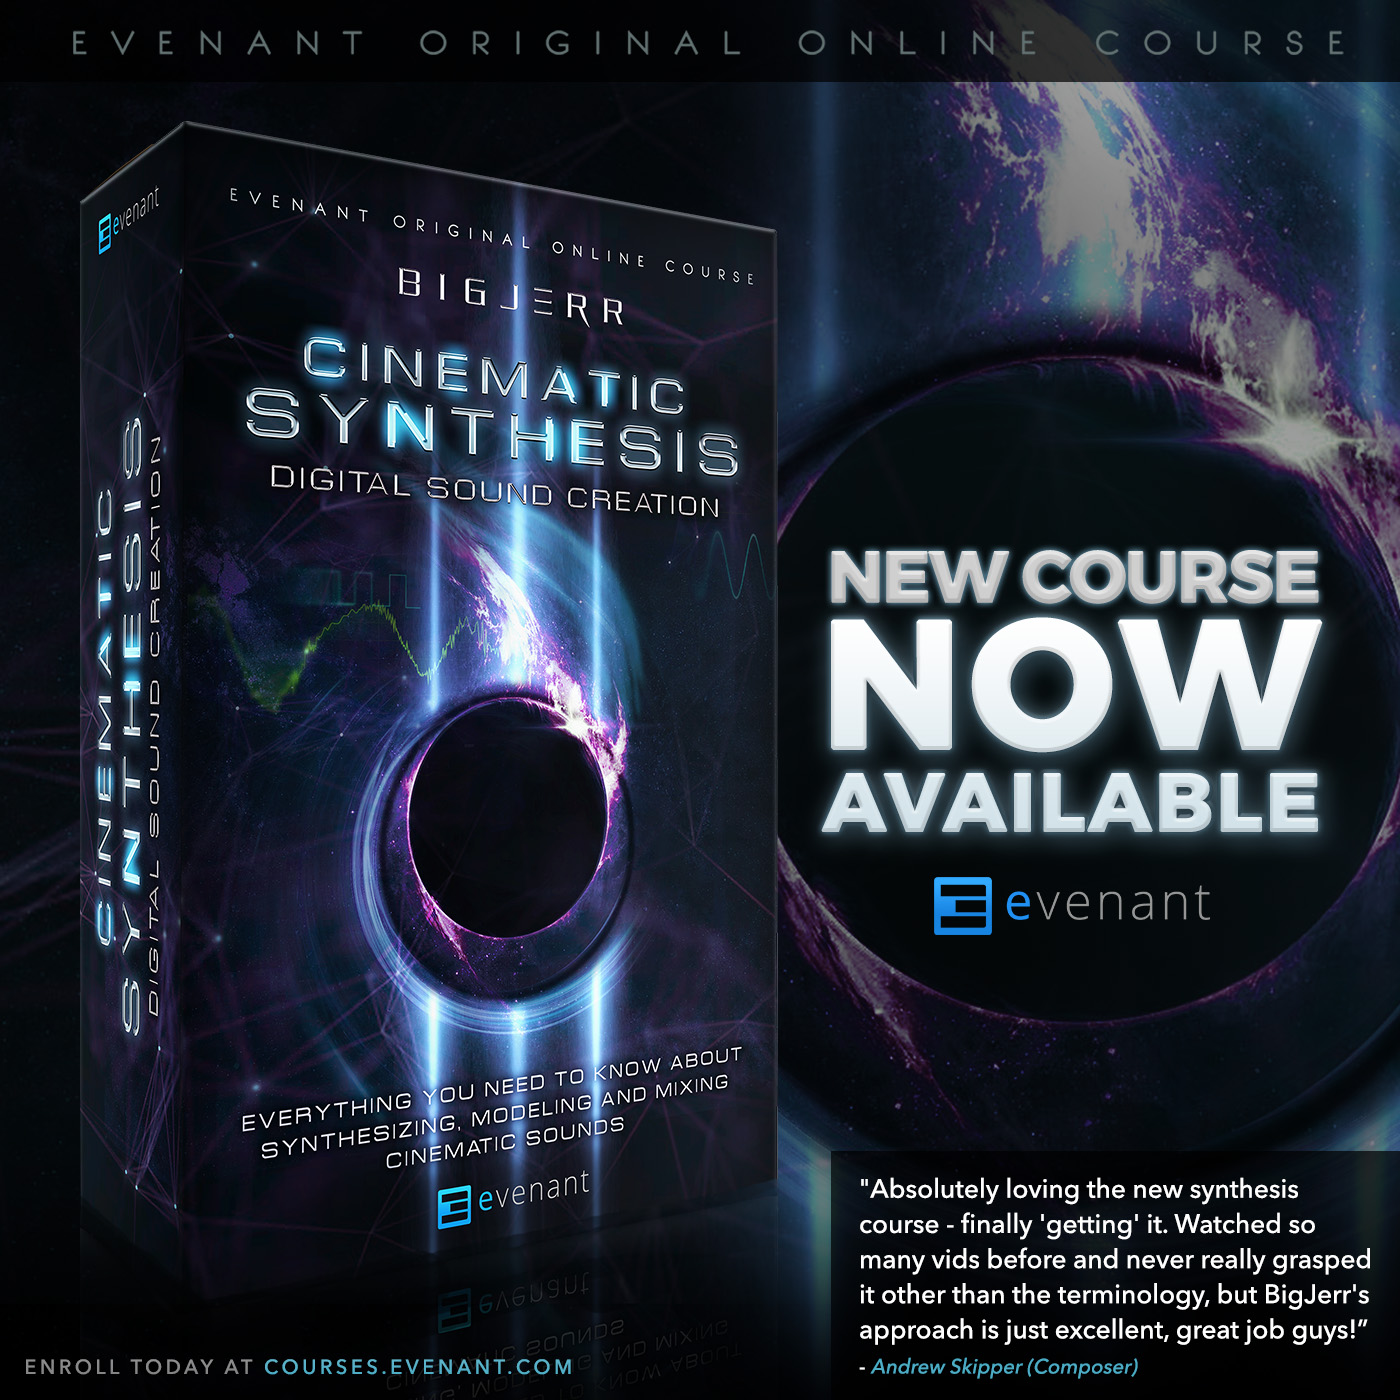 New Course Launch Cinematic Synthesis Digital Sound Creation